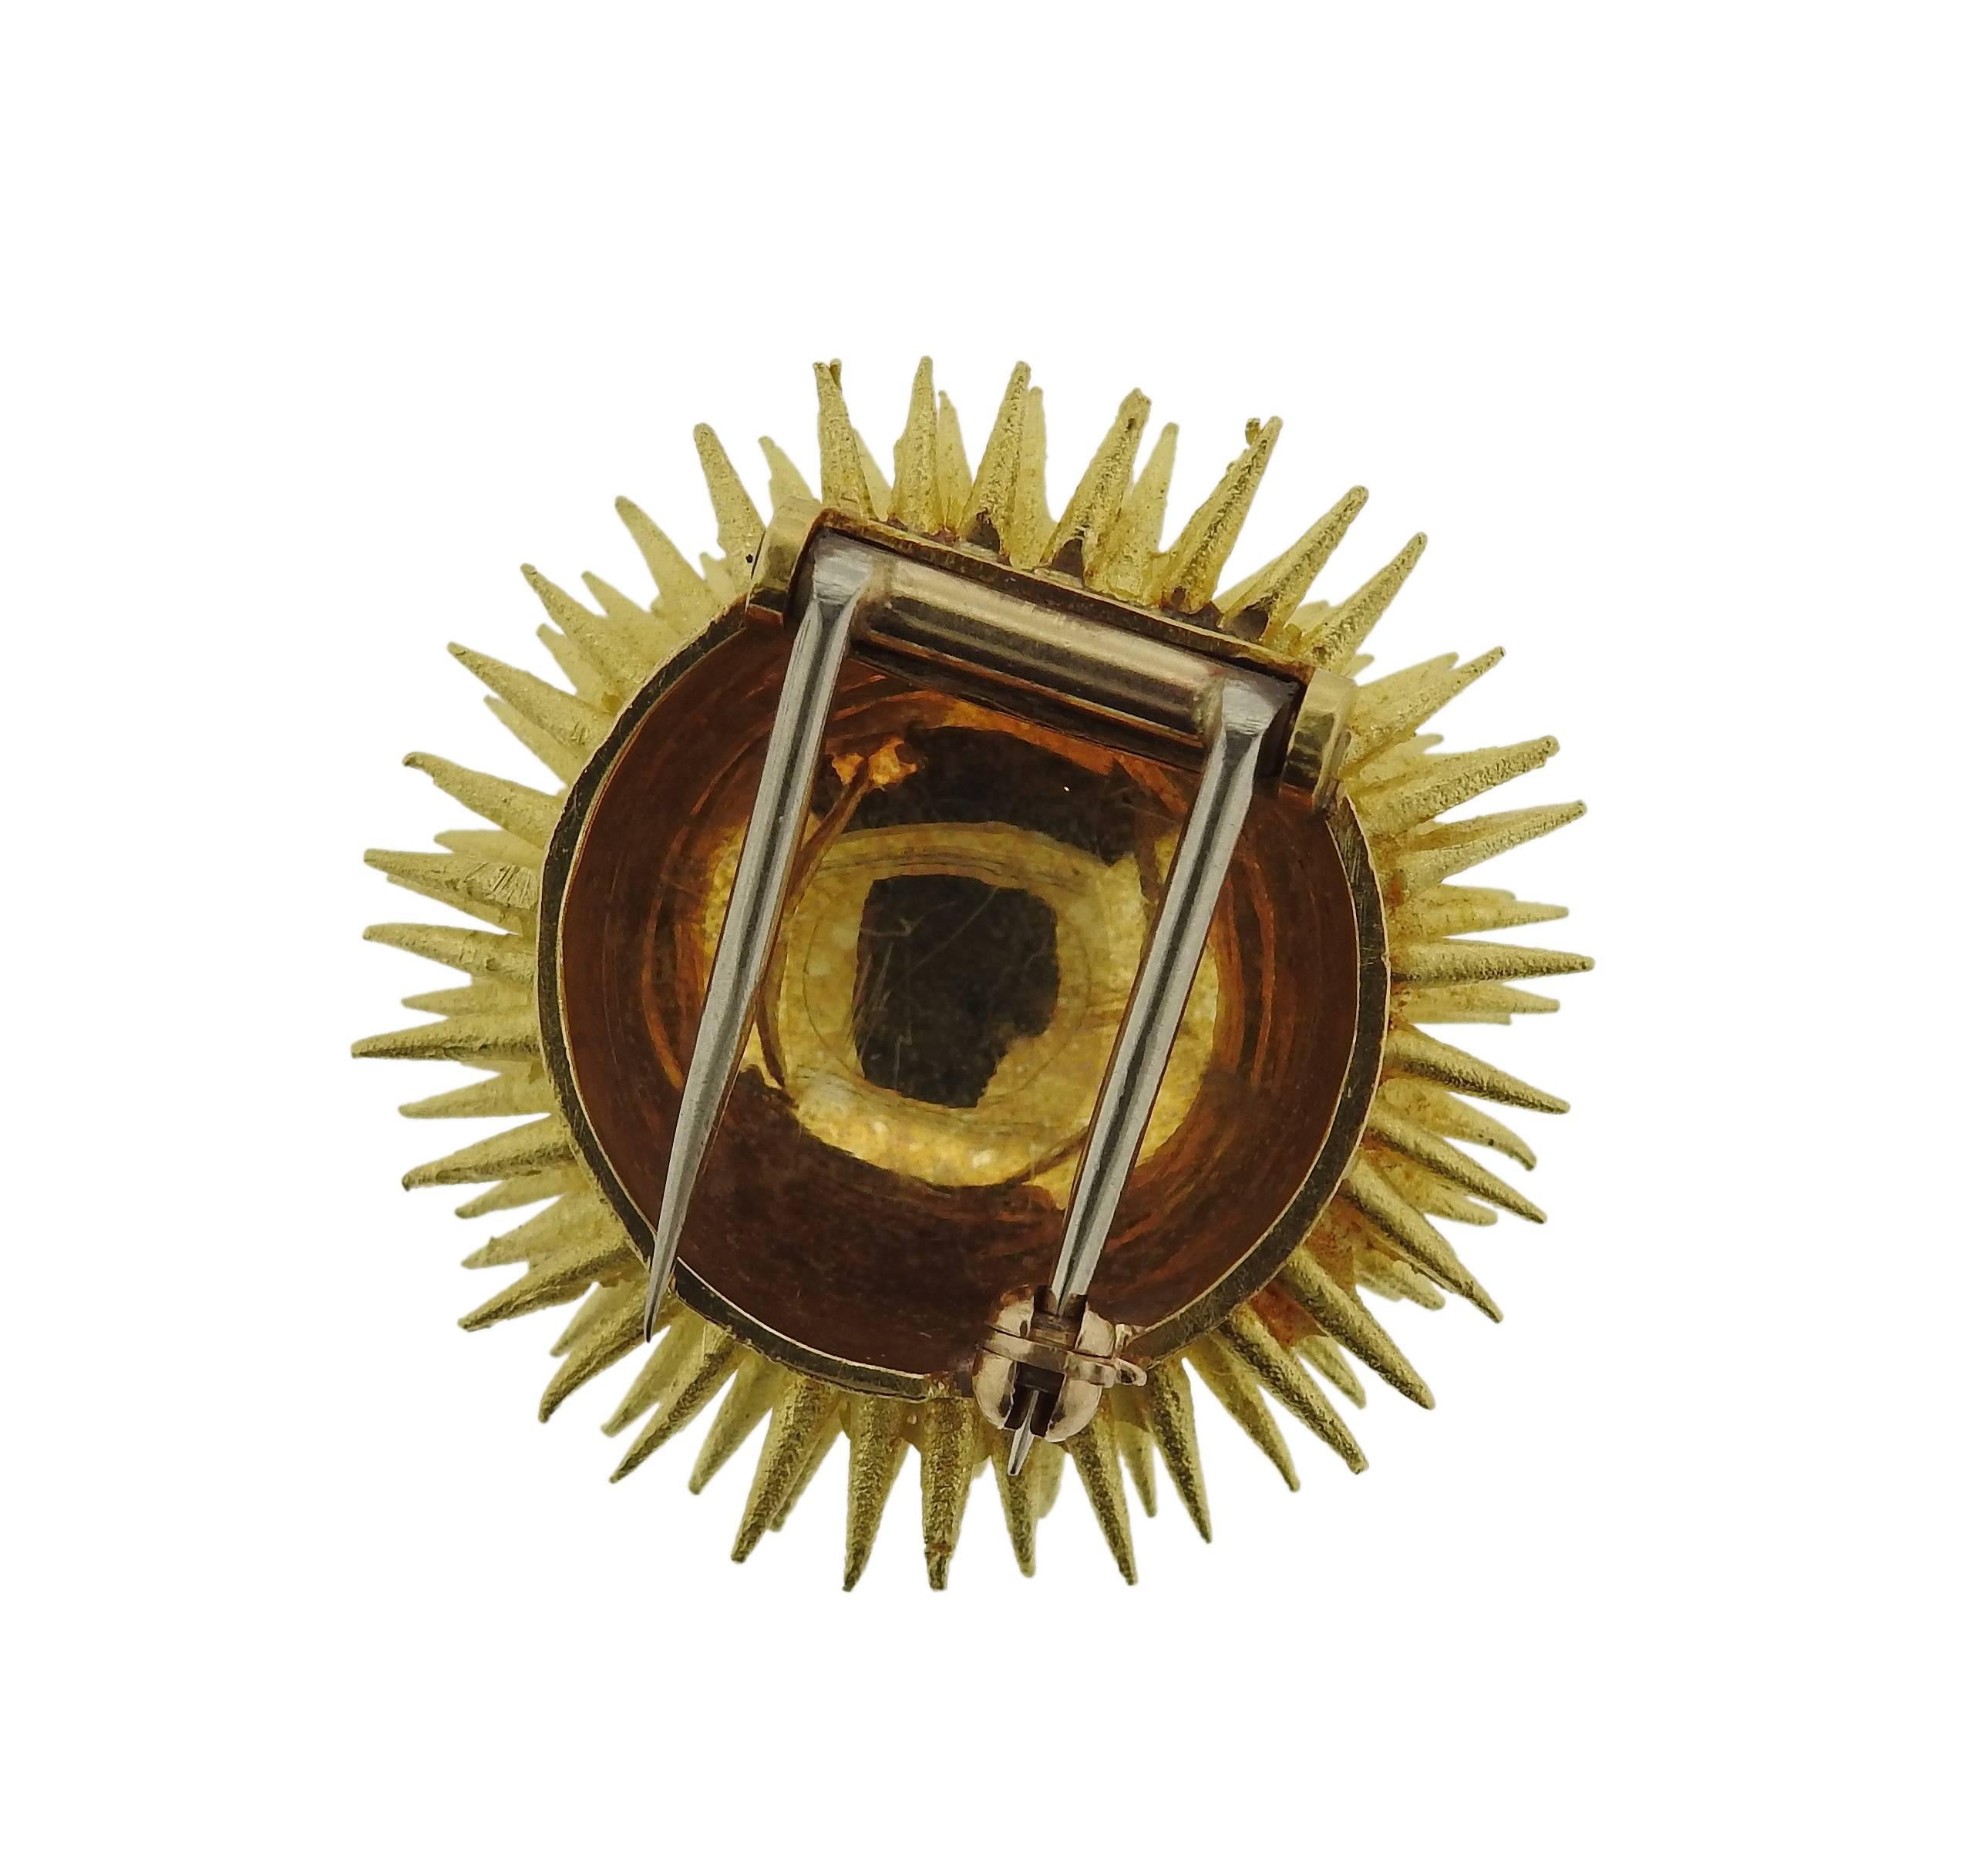 An 18k yellow gold sea urchin brooch, crafted by Tiffany & Co, decorated with a diamond and rubies. Brooch measures 26mm in diameter and weighs 17.1 grams. Marked Tiffany & Co and 18k. 